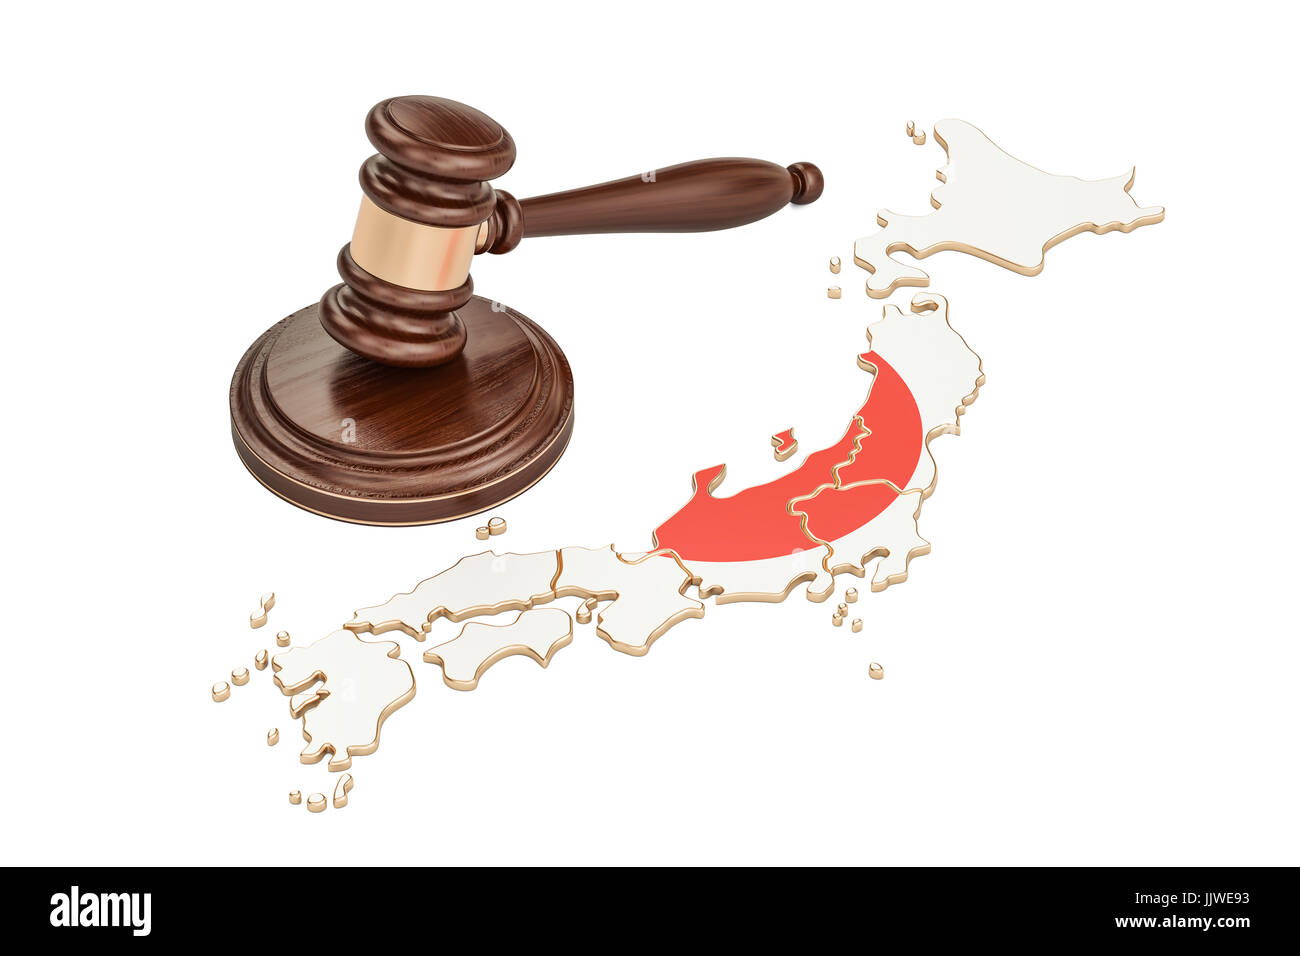 Wooden Gavel on map of Japan, 3D rendering isolated on white background Stock Photo